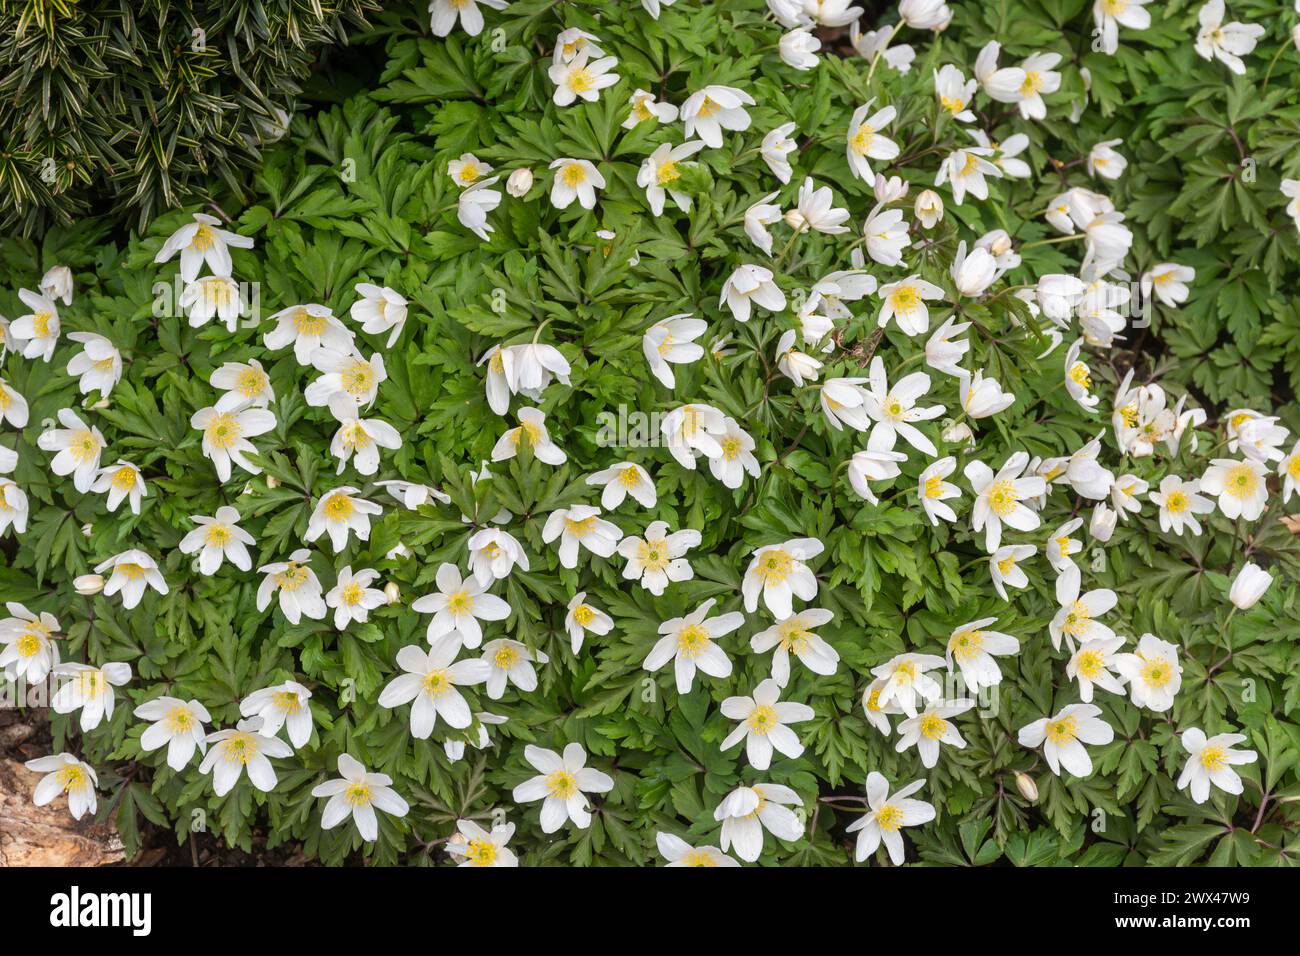 Wood anemones (Anemonoides nemorosa), a clump of the spring flowers in a garden during March, England, UK Stock Photo